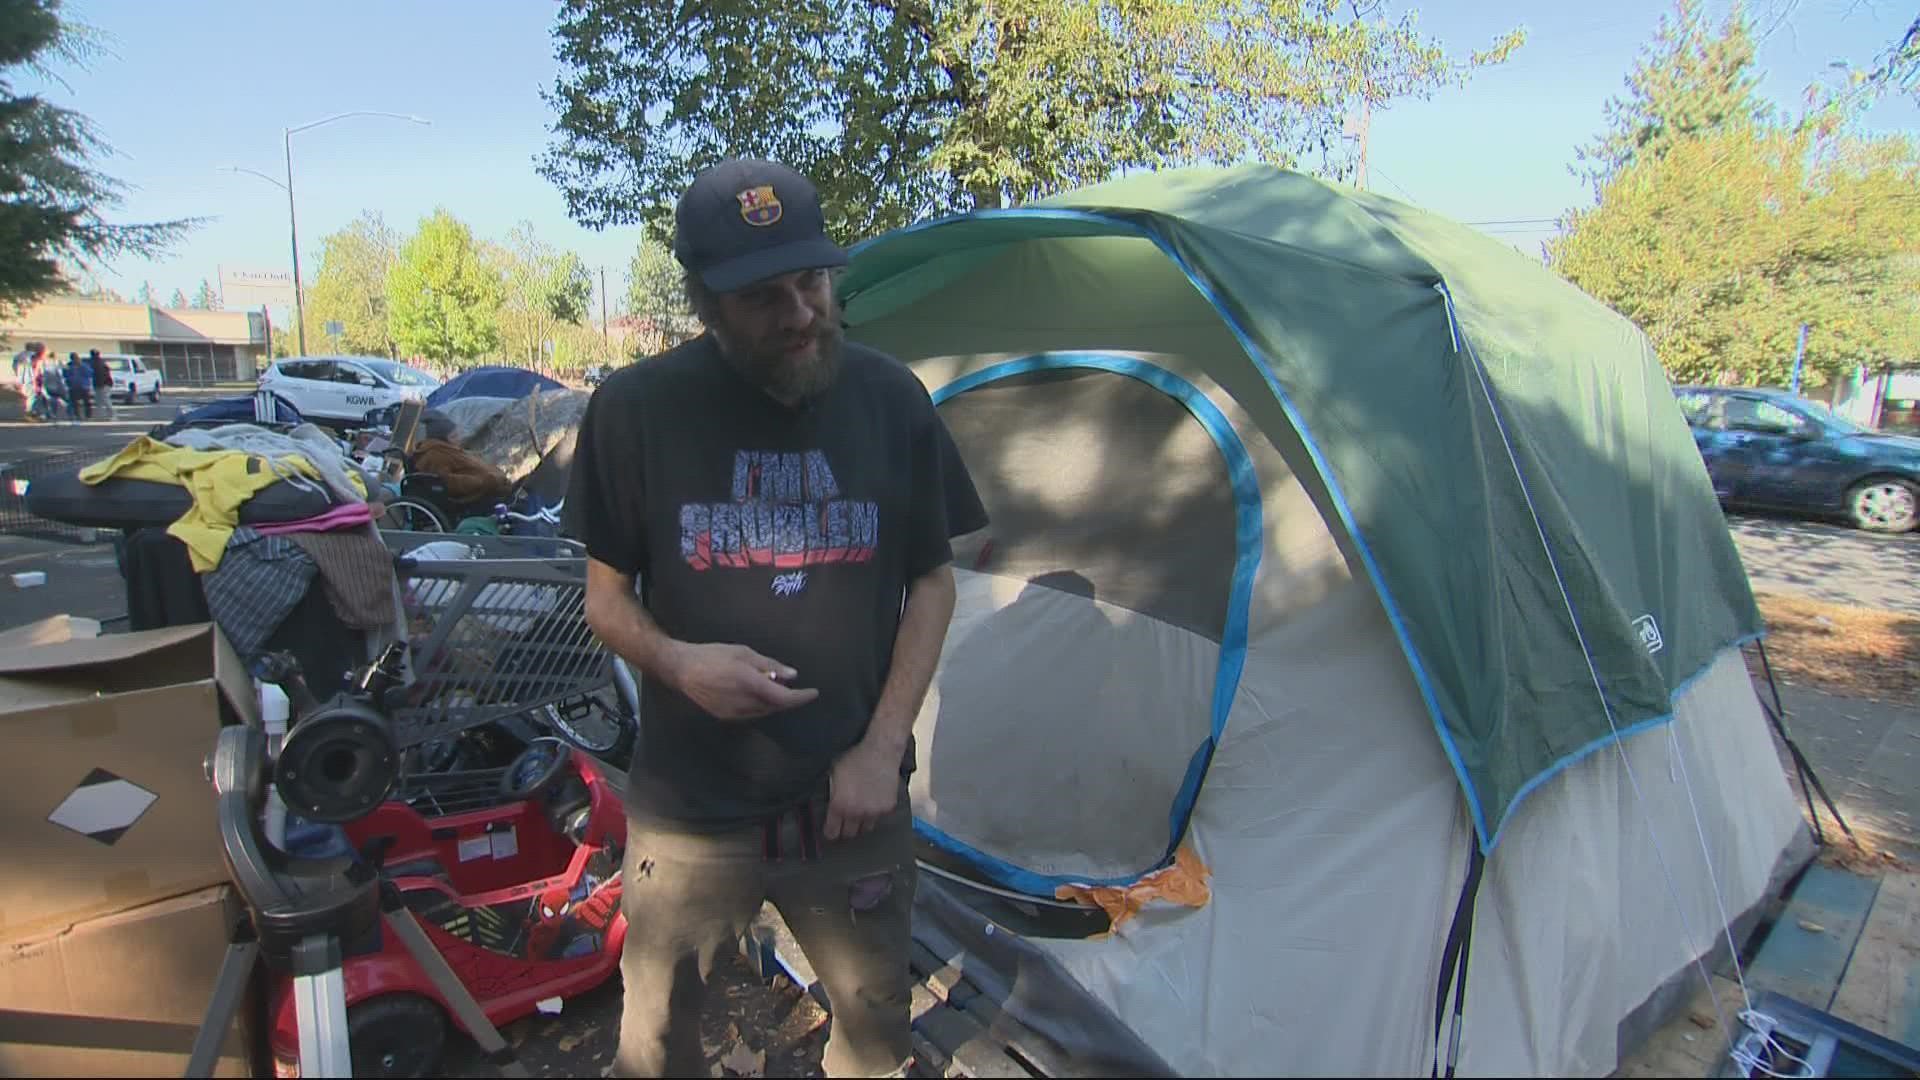 Many Portlanders experiencing homelessness with a felony record have to clear high barriers to get off the streets and into housing. KGW connects with those impacted